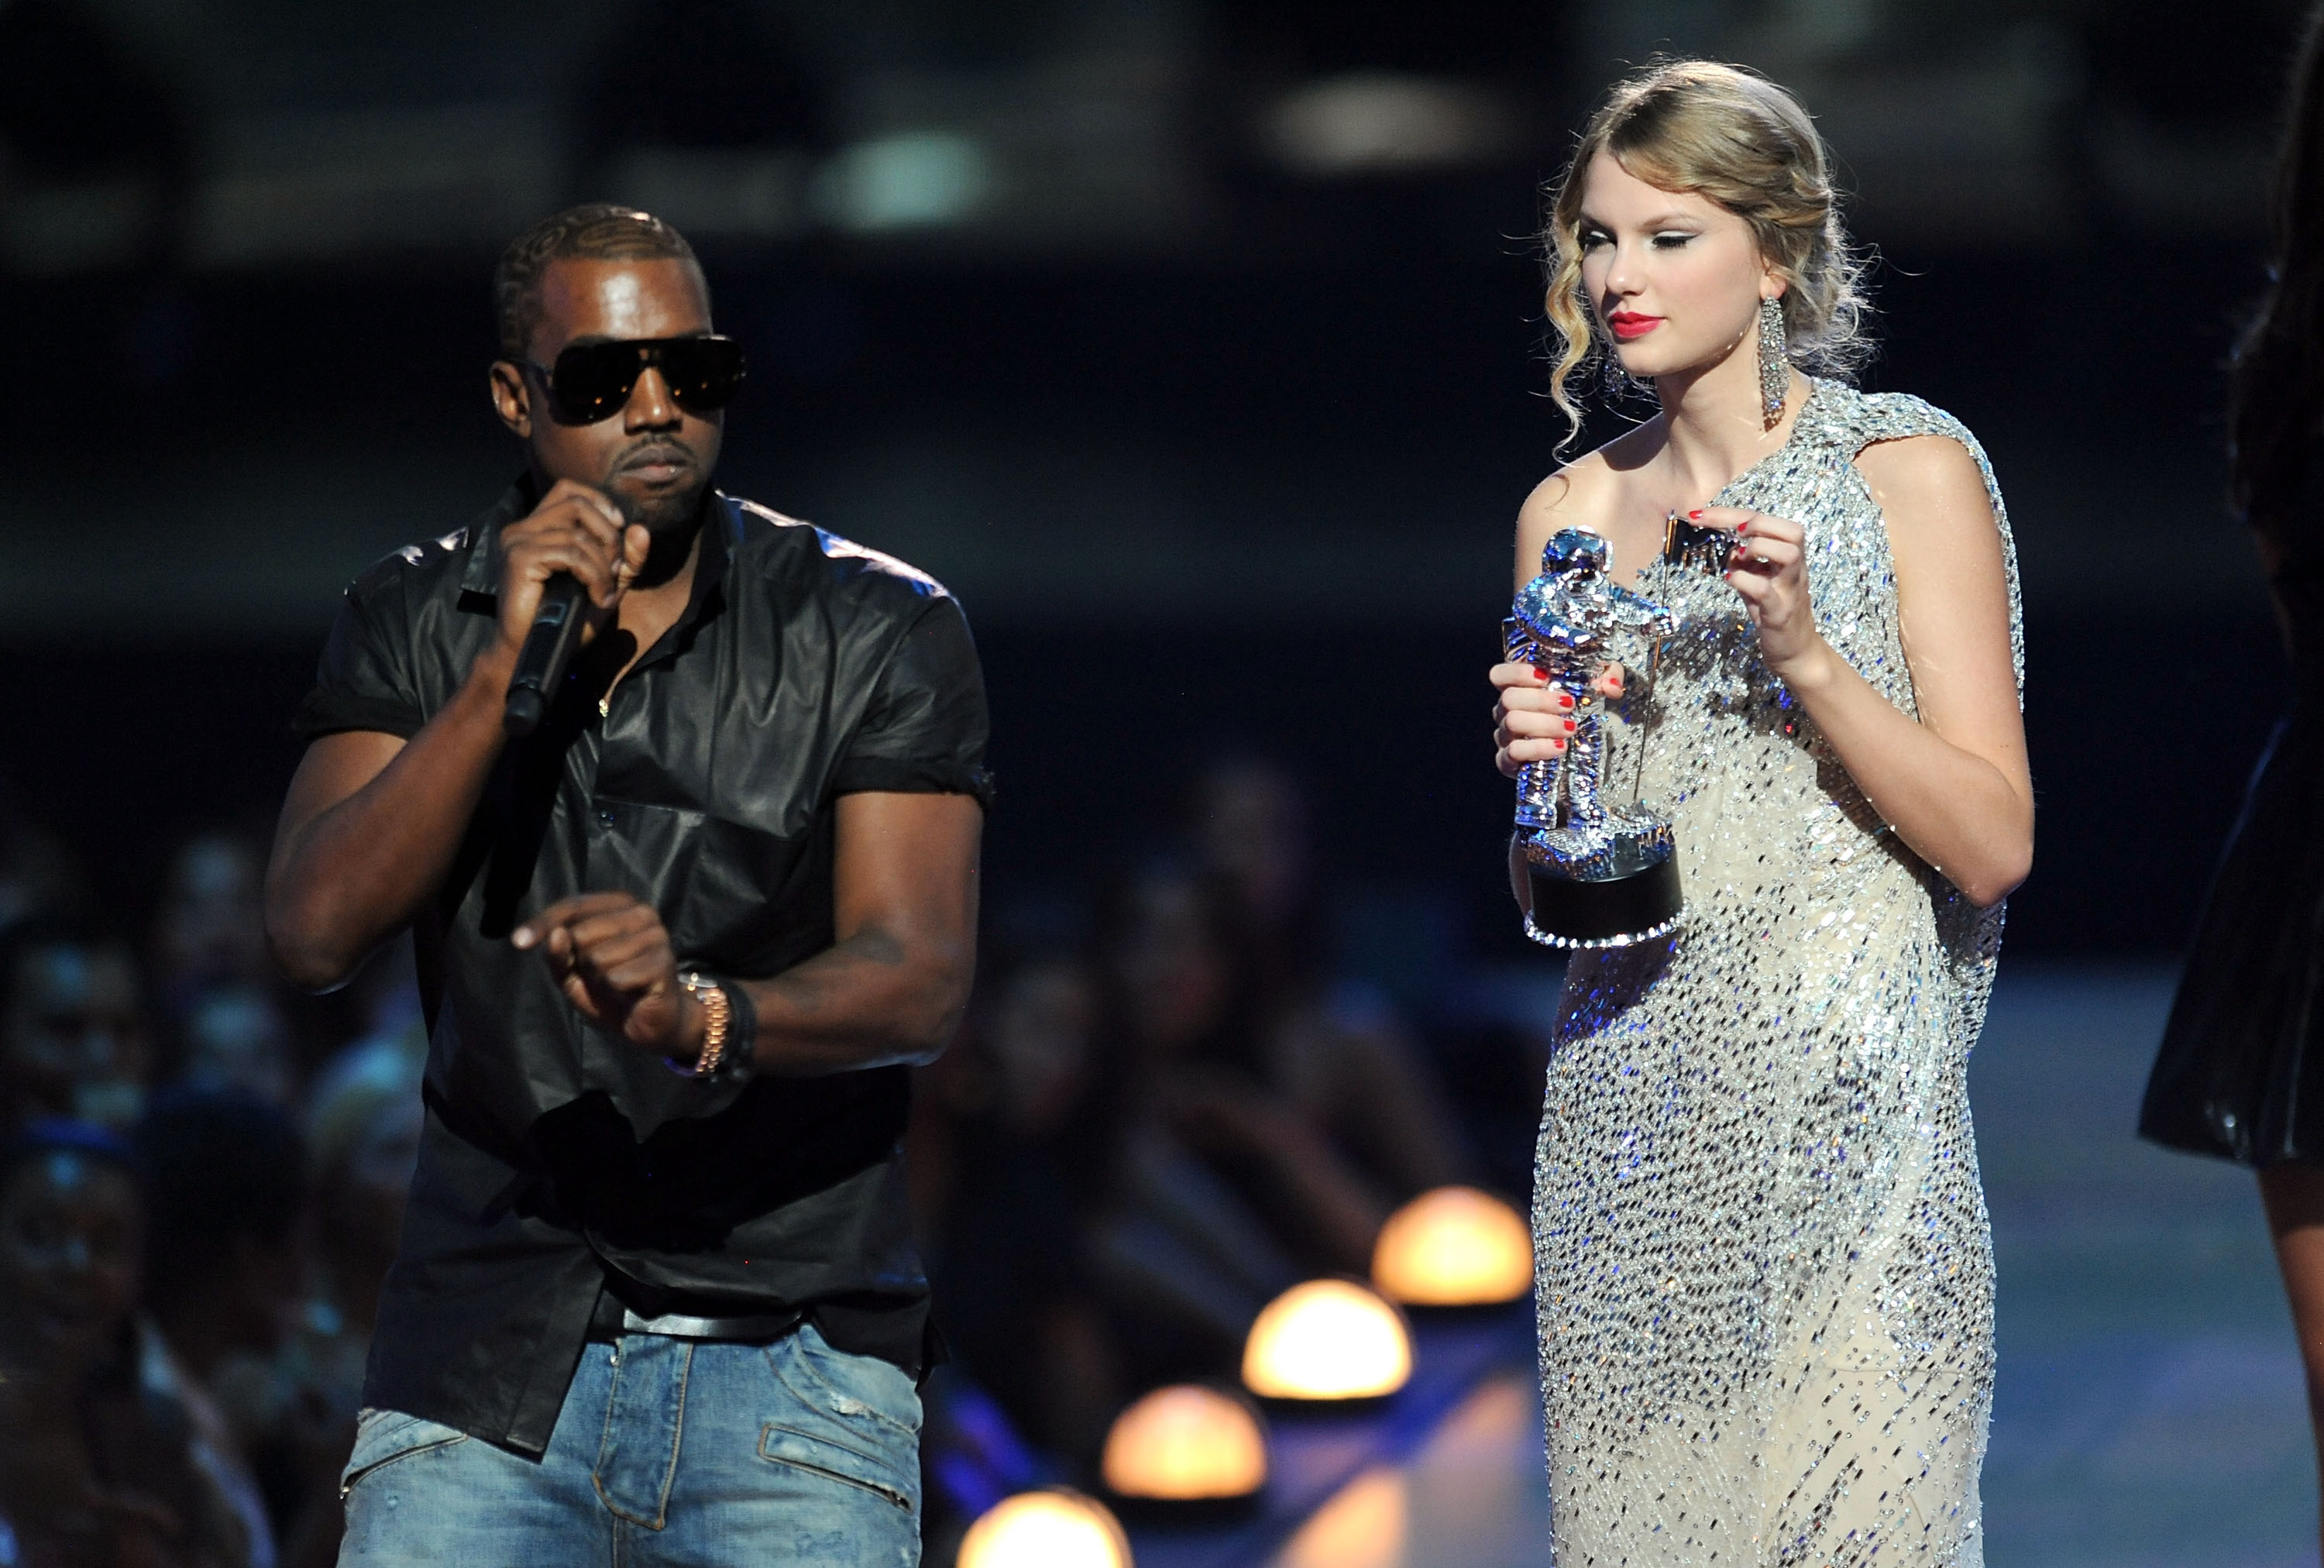 Kanye and Taylor onstage